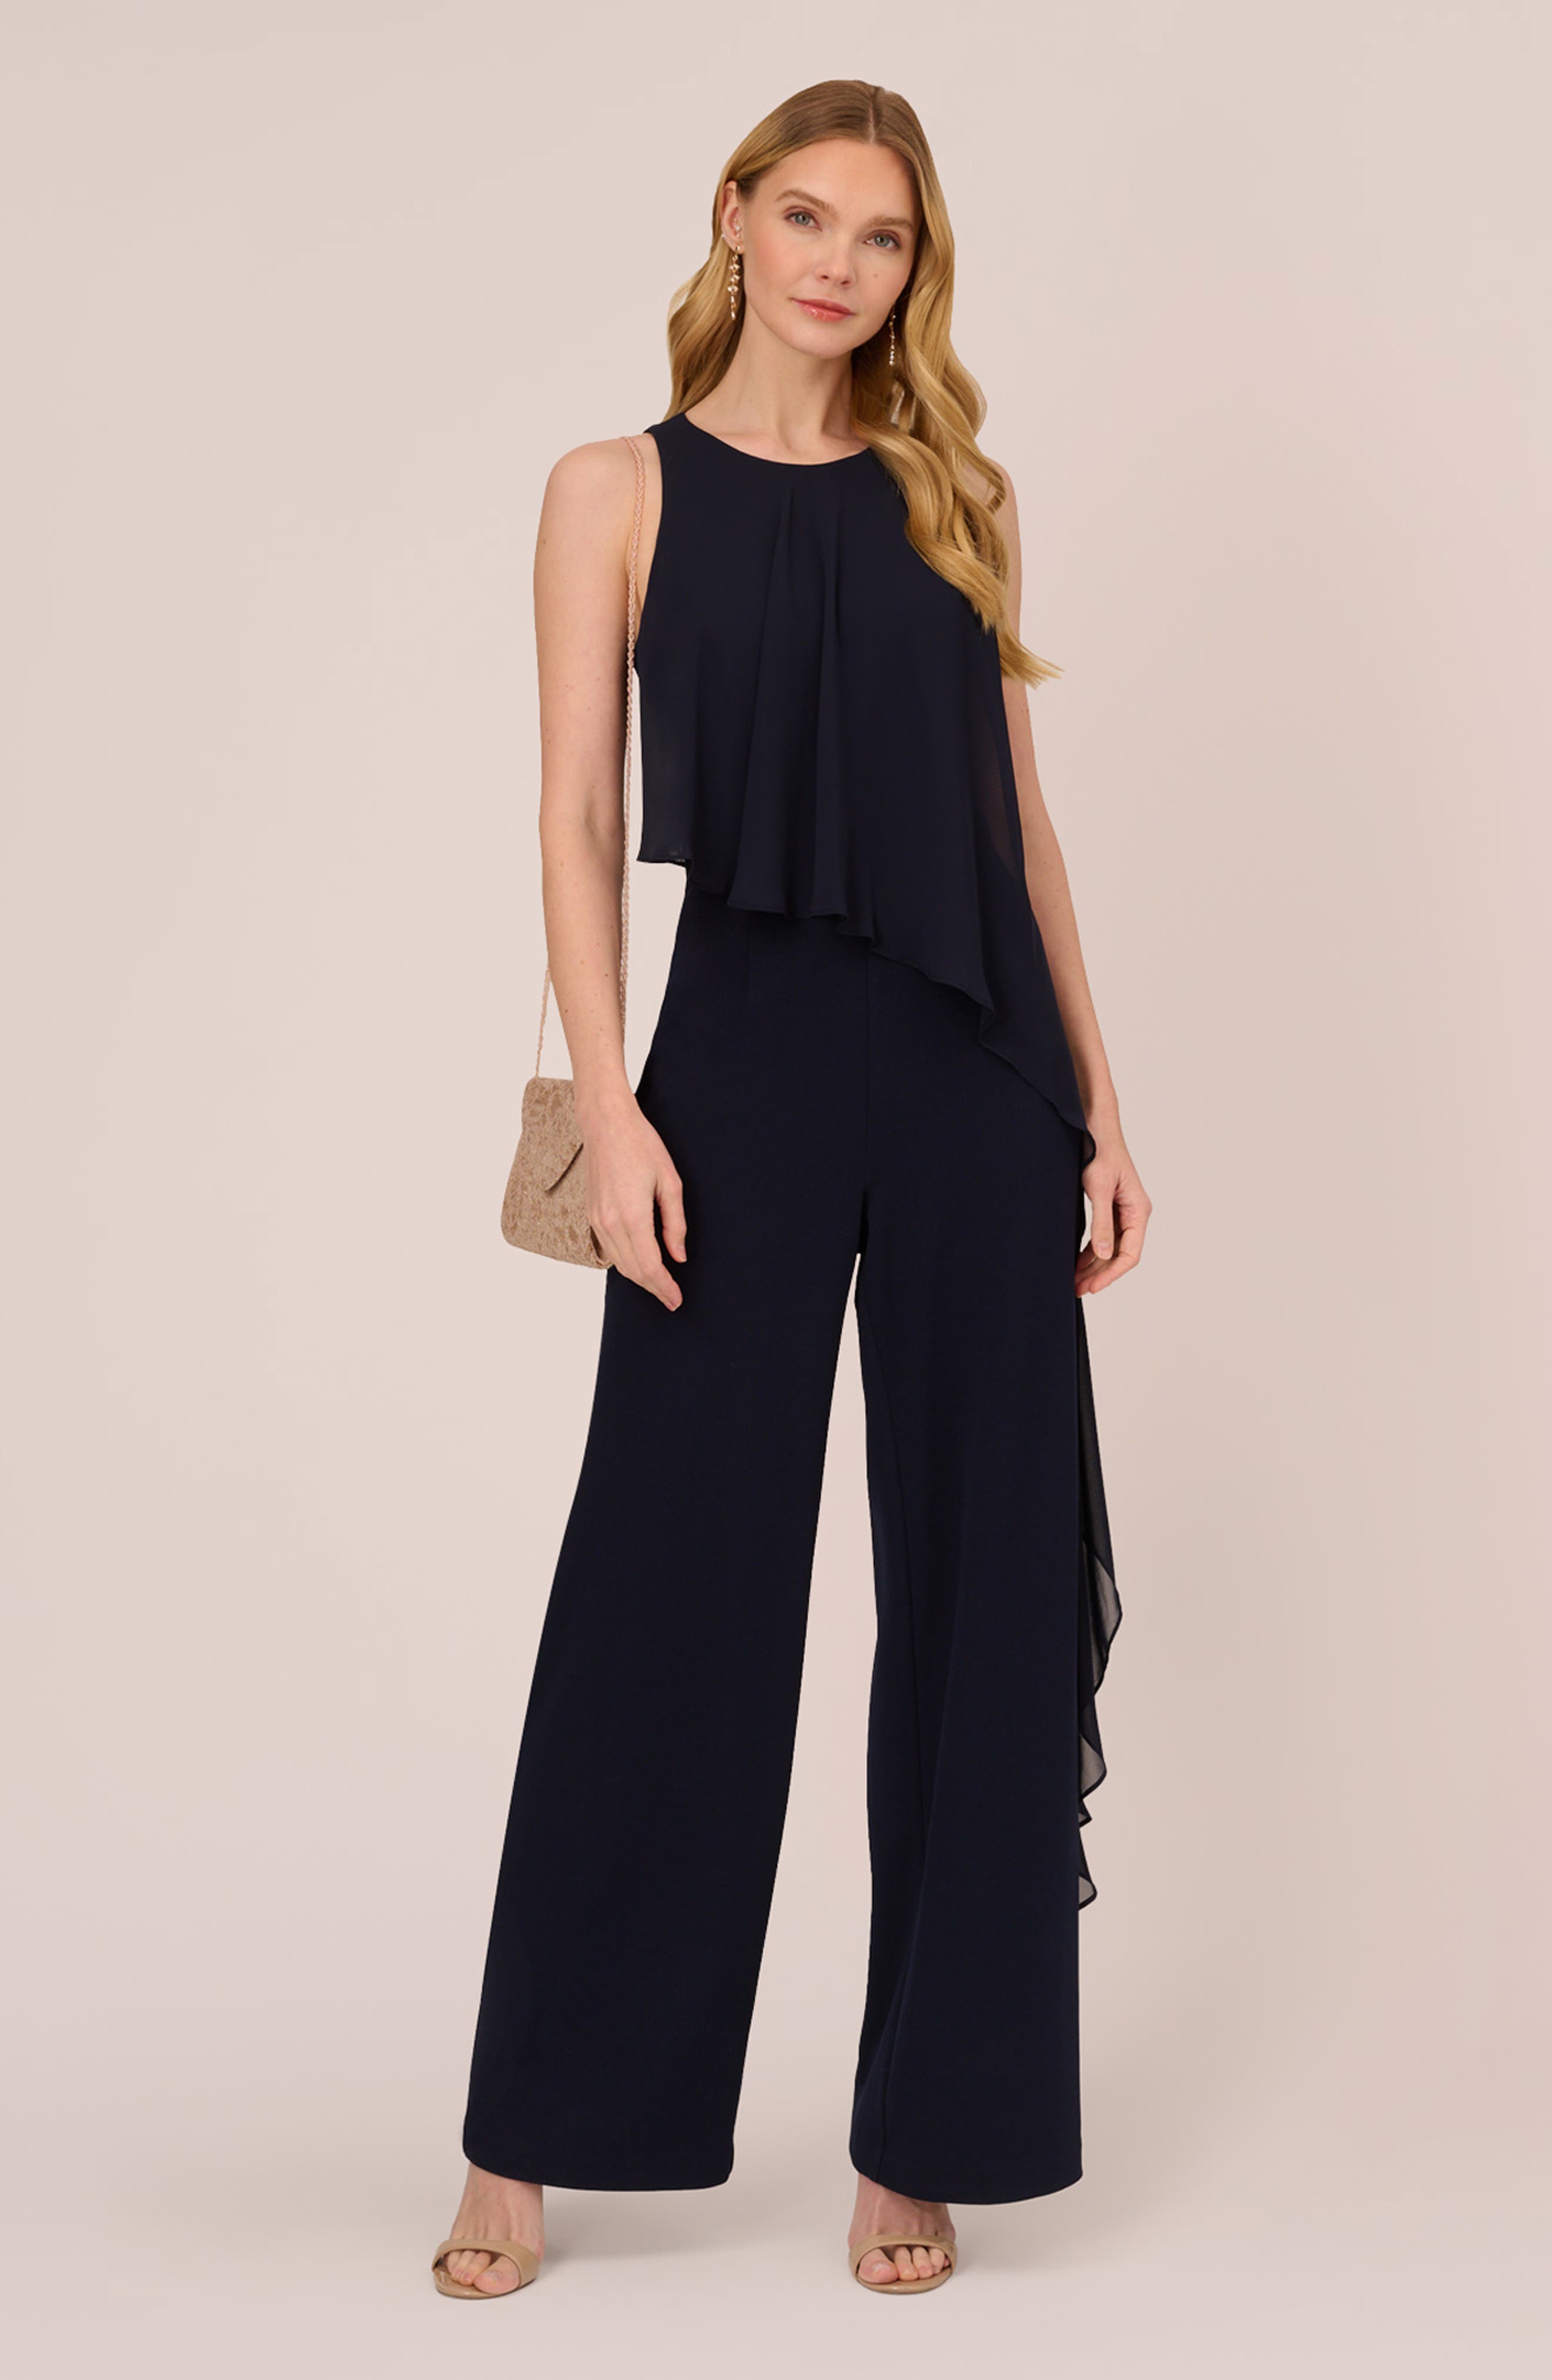 Floral-Print Cropped Jumpsuit With Chiffon Overlay In Navy Multi